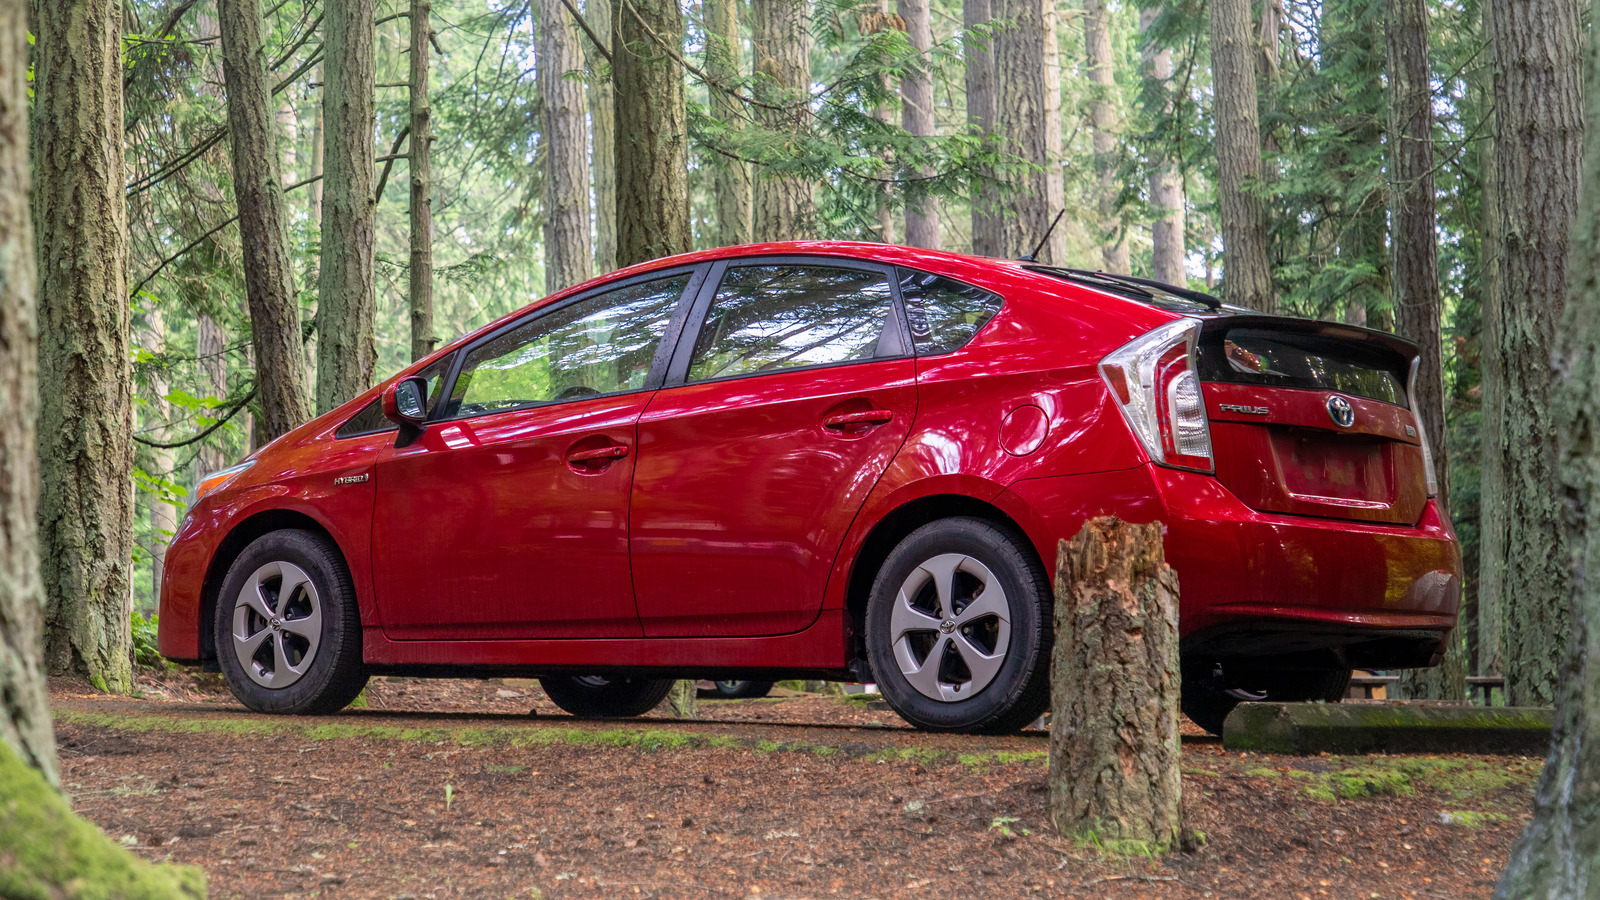 How Long Will A Toyota Prius Last With Regular Maintenance?